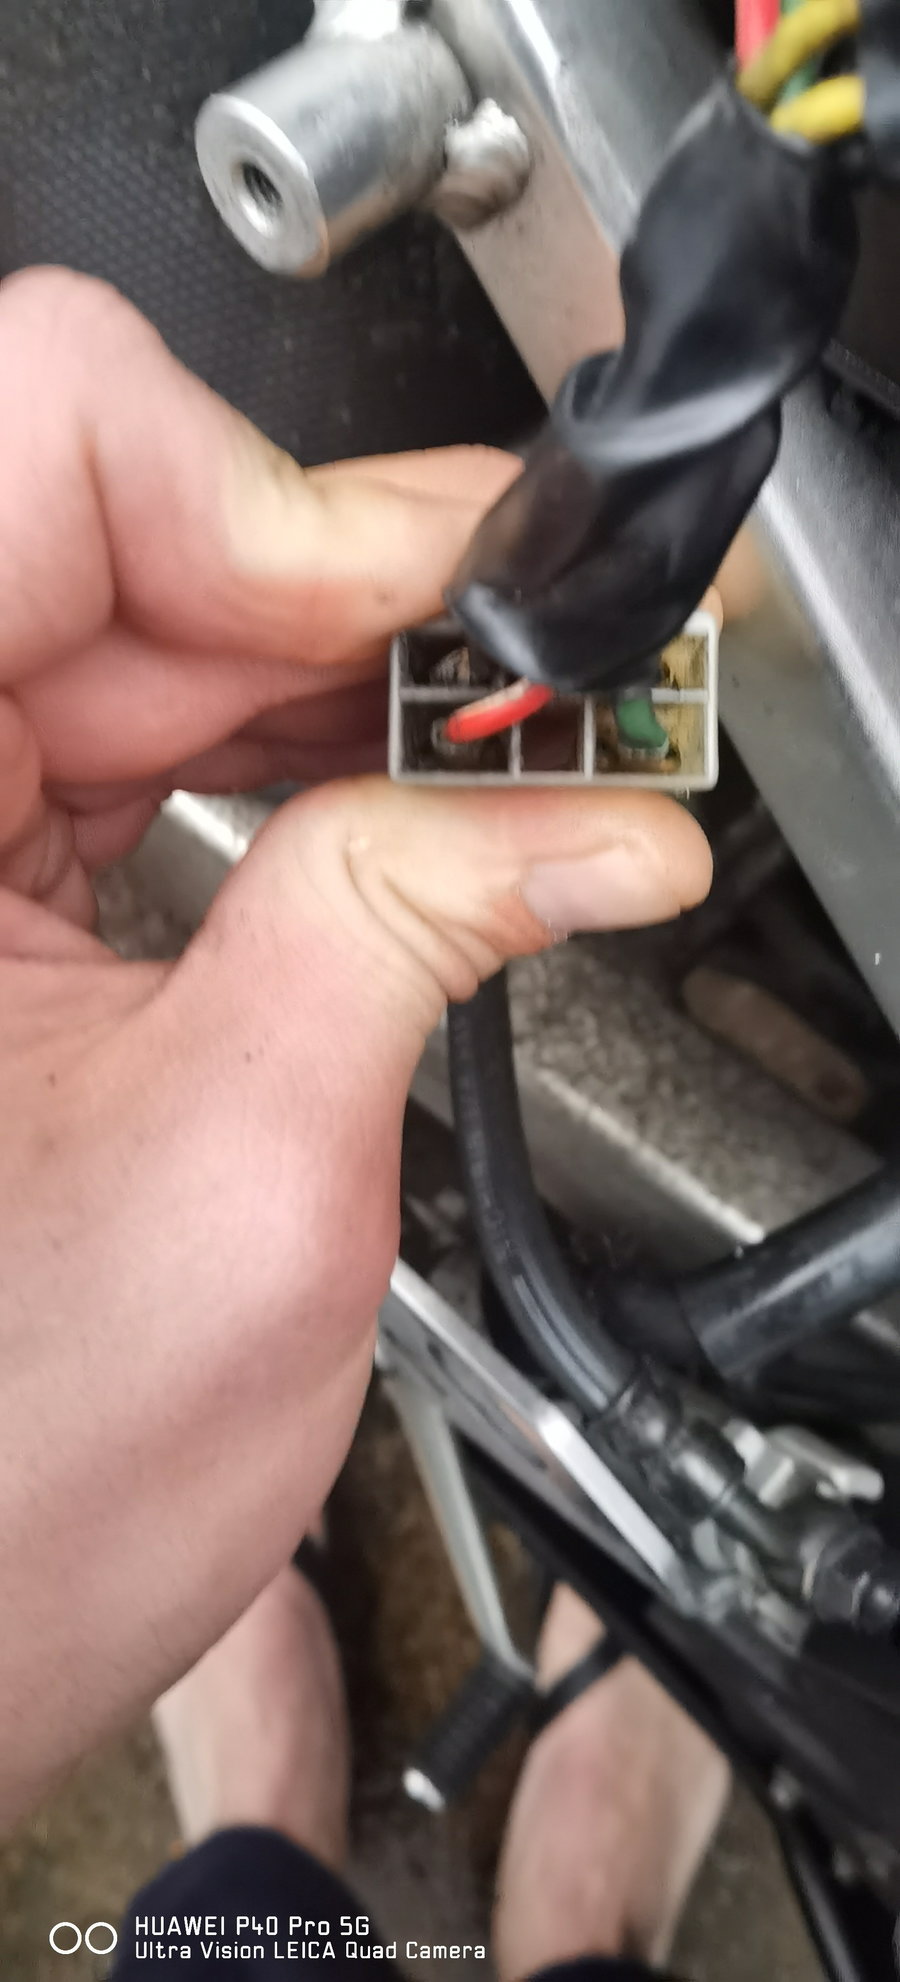 Need help with Regulator Wiring. - CBR Forum - Enthusiast forums for